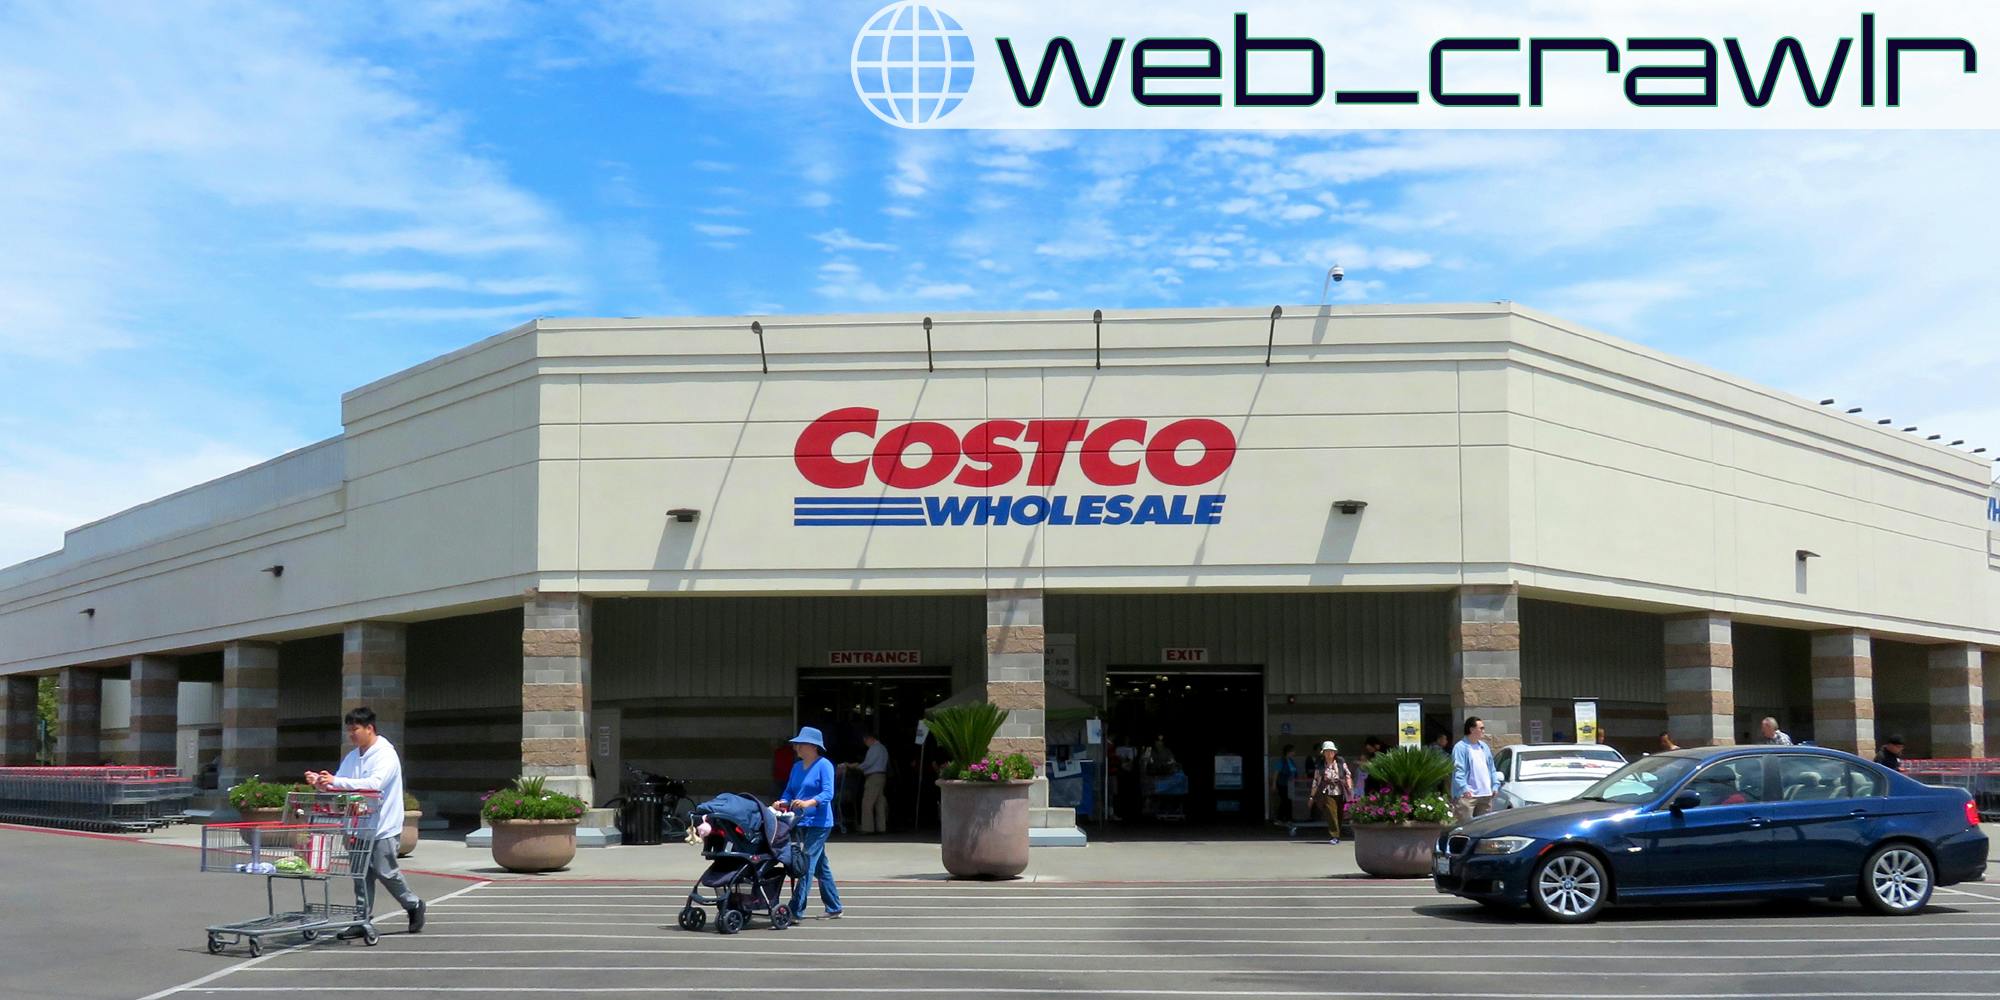 A Costco building. The Daily Dot newsletter web_crawlr logo is in the top right corner.